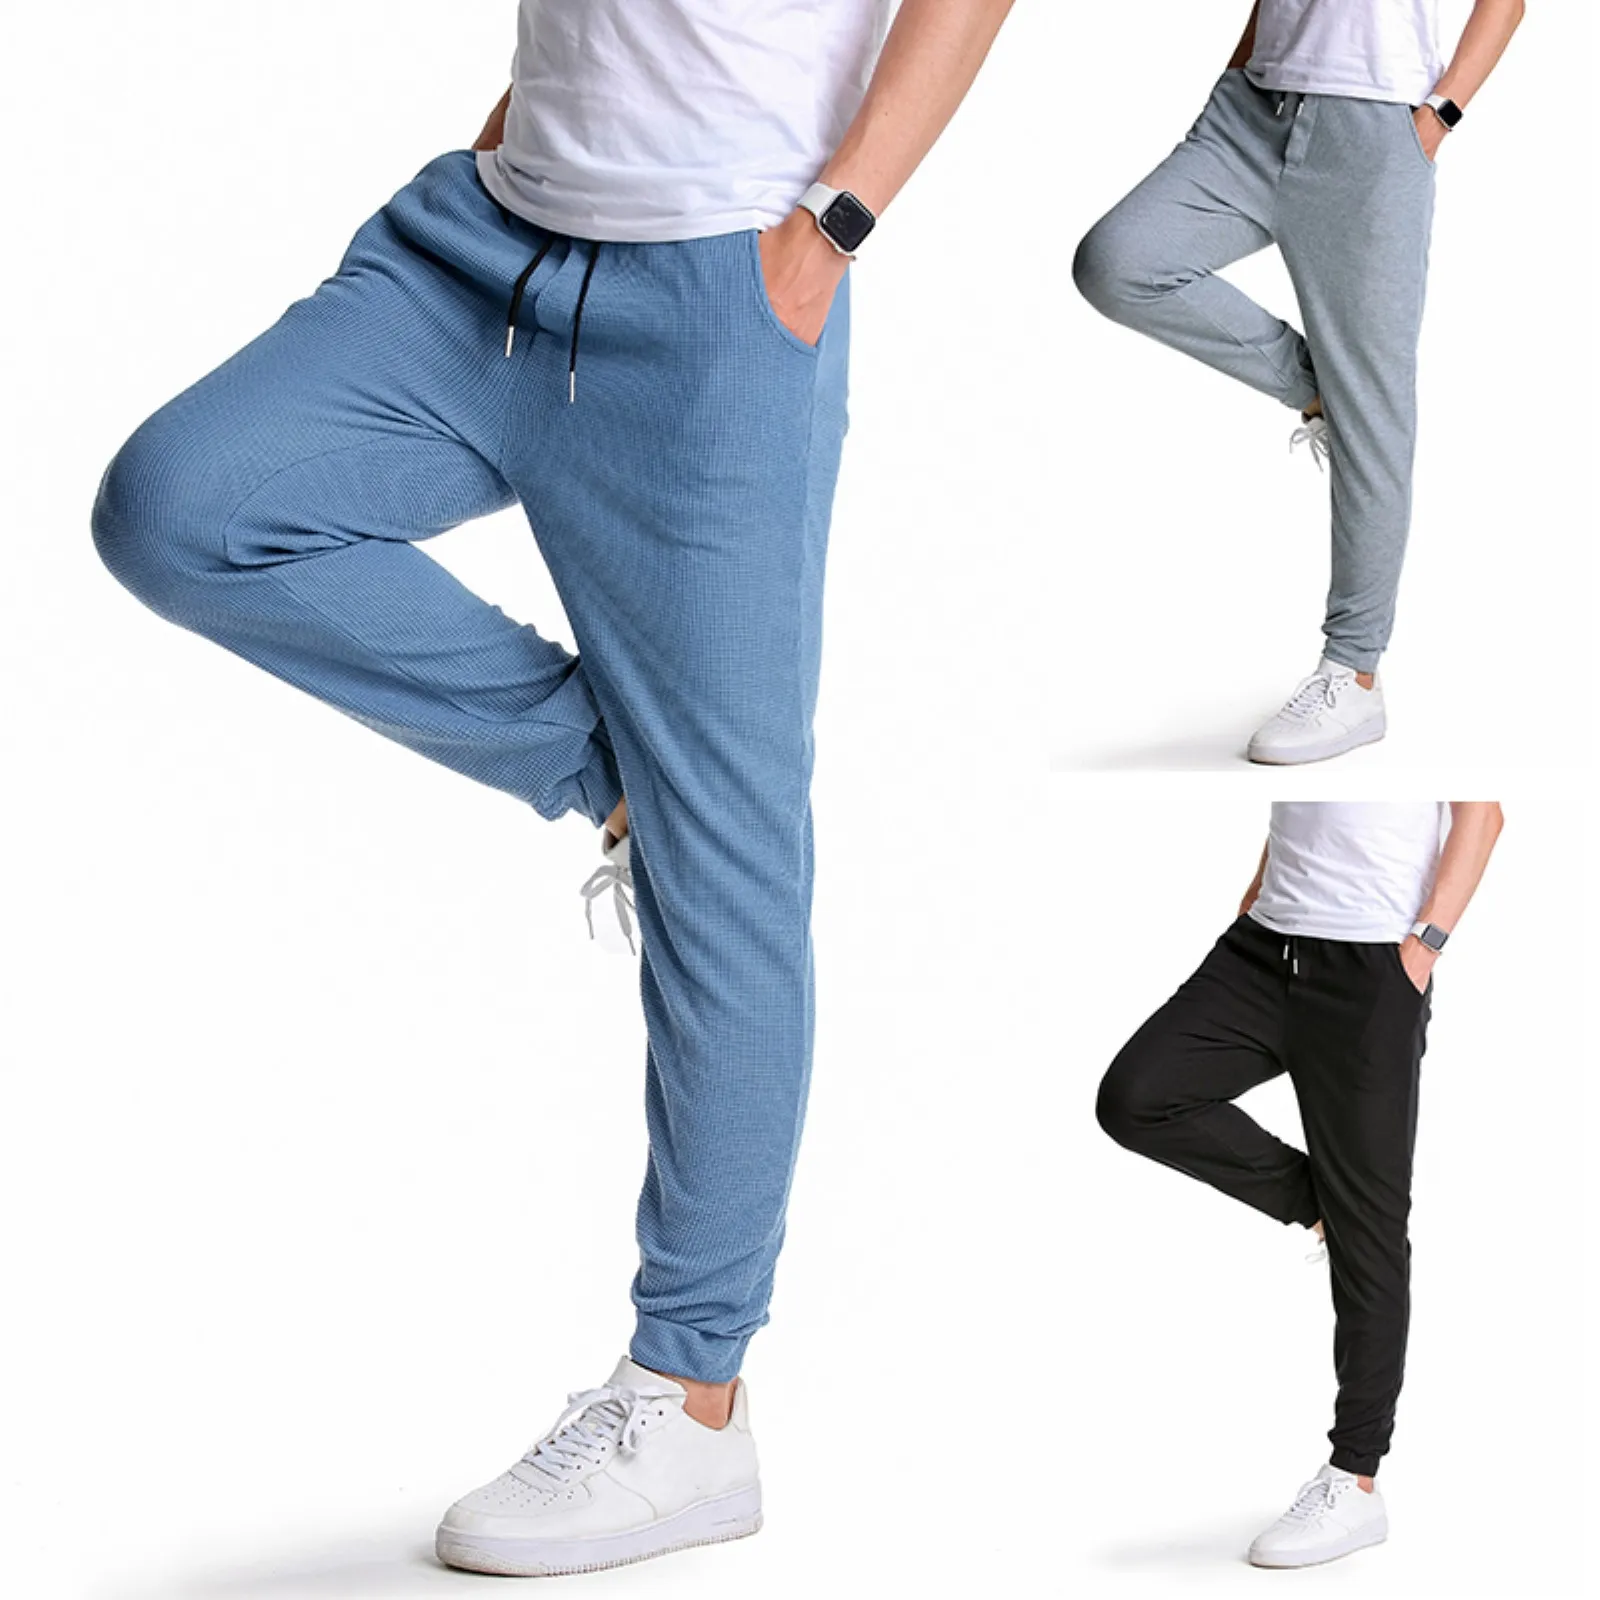 

Men'S Pants Breathable Soild Color Sports Binding Foot Tether Long Pants With Pockets Pantalones Hombres Clothings Streetwear Pa